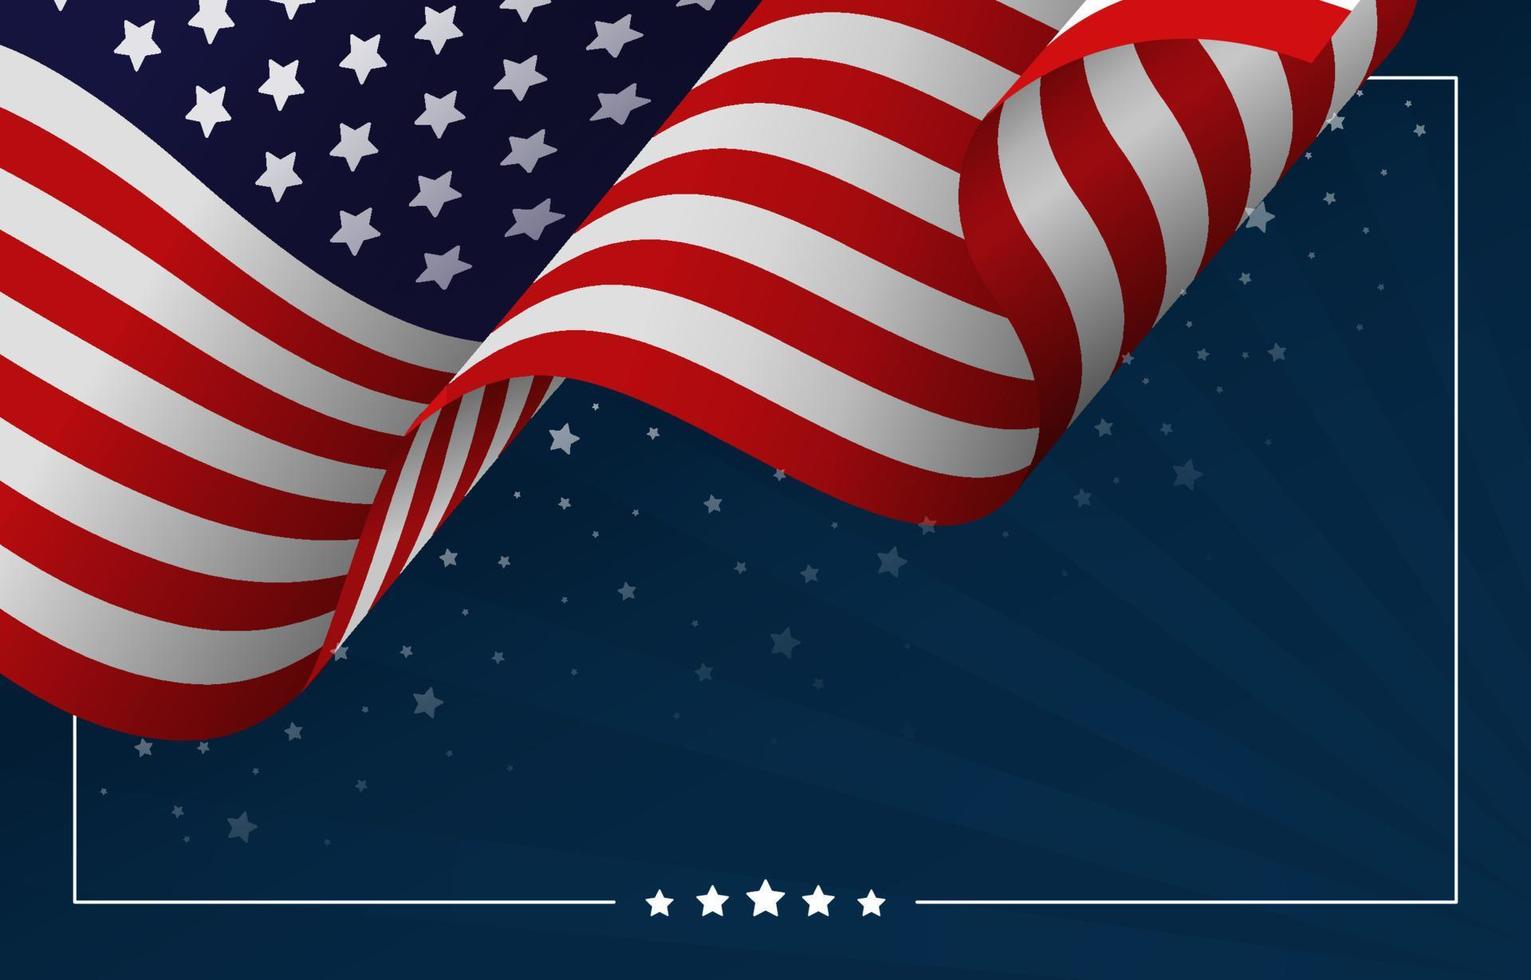 USA Flag 4th of July with Scattered Stars vector